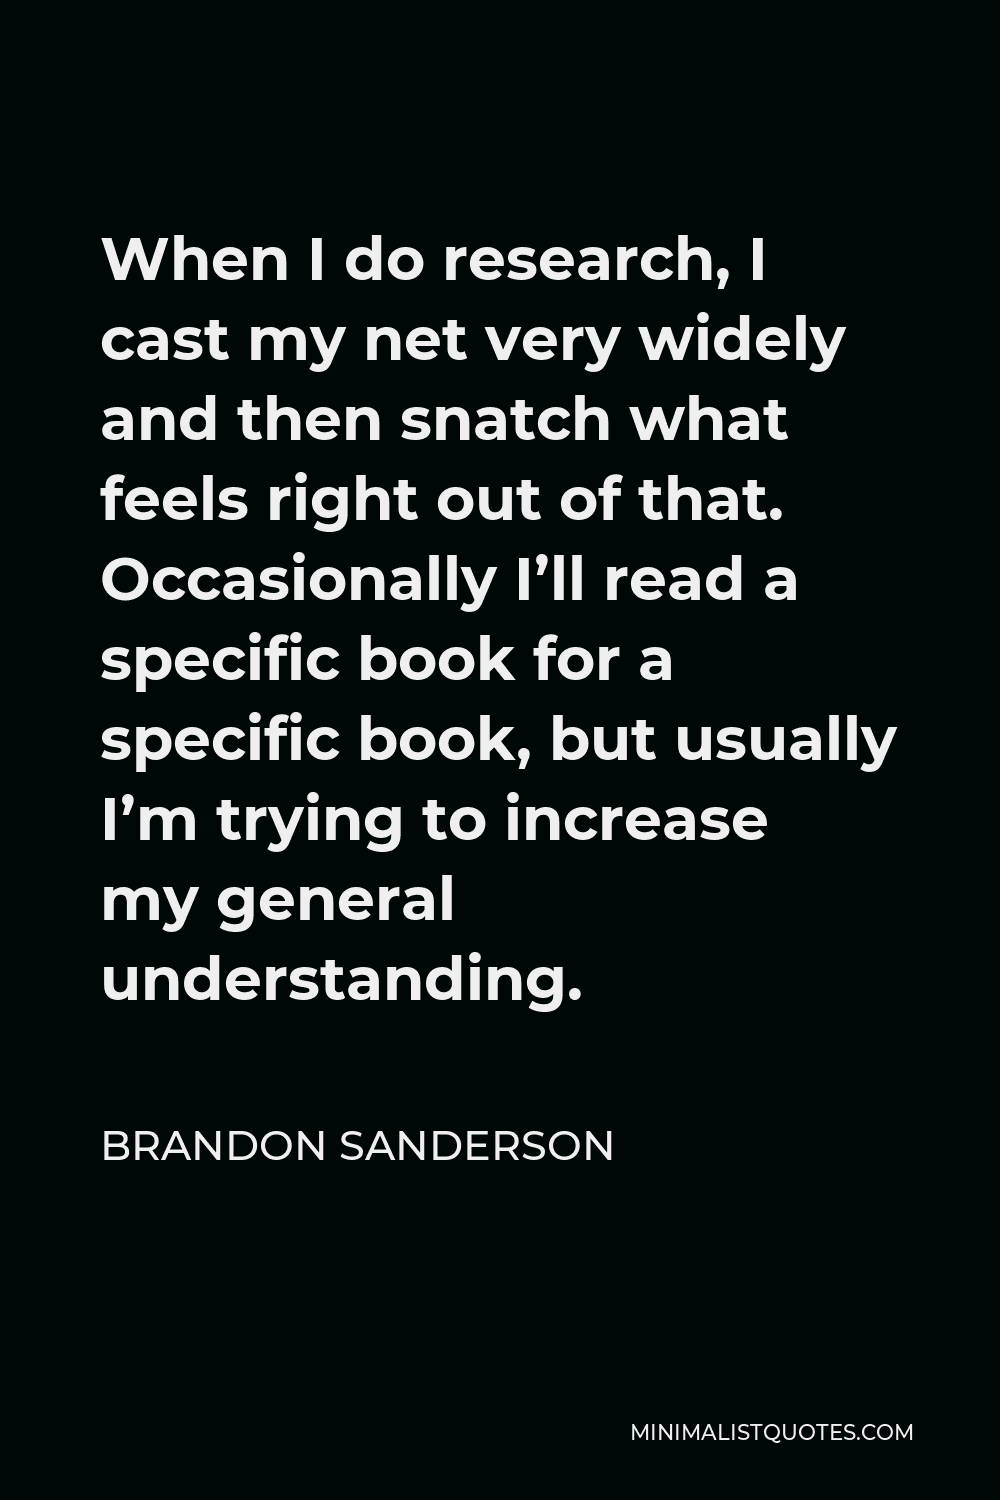 Brandon Sanderson Quote - When I do research, I cast my net very widely and then snatch what feels right out of that. Occasionally I’ll read a specific book for a specific book, but usually I’m trying to increase my general understanding.